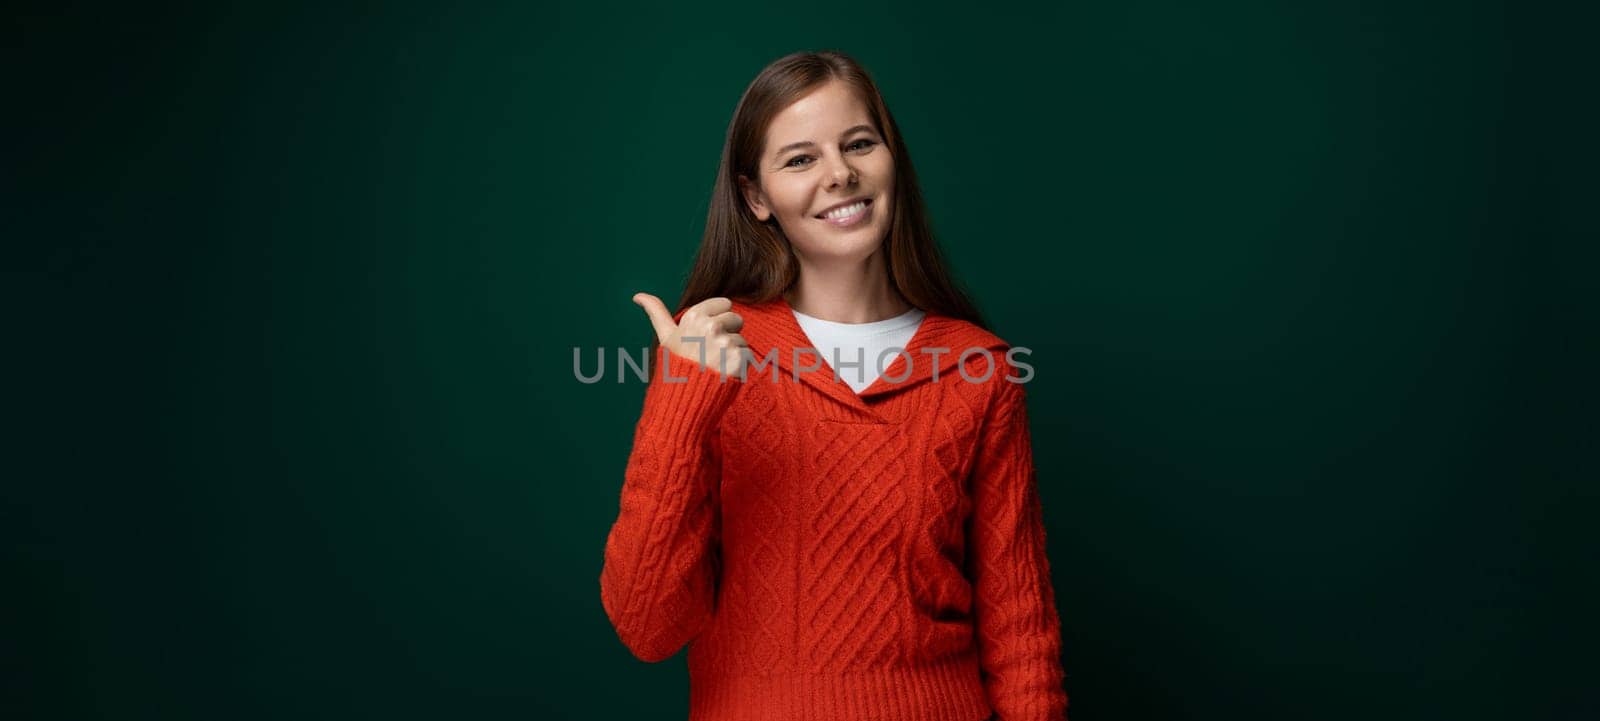 Successful Caucasian woman with brown hair wearing a red sweater on a green background by TRMK